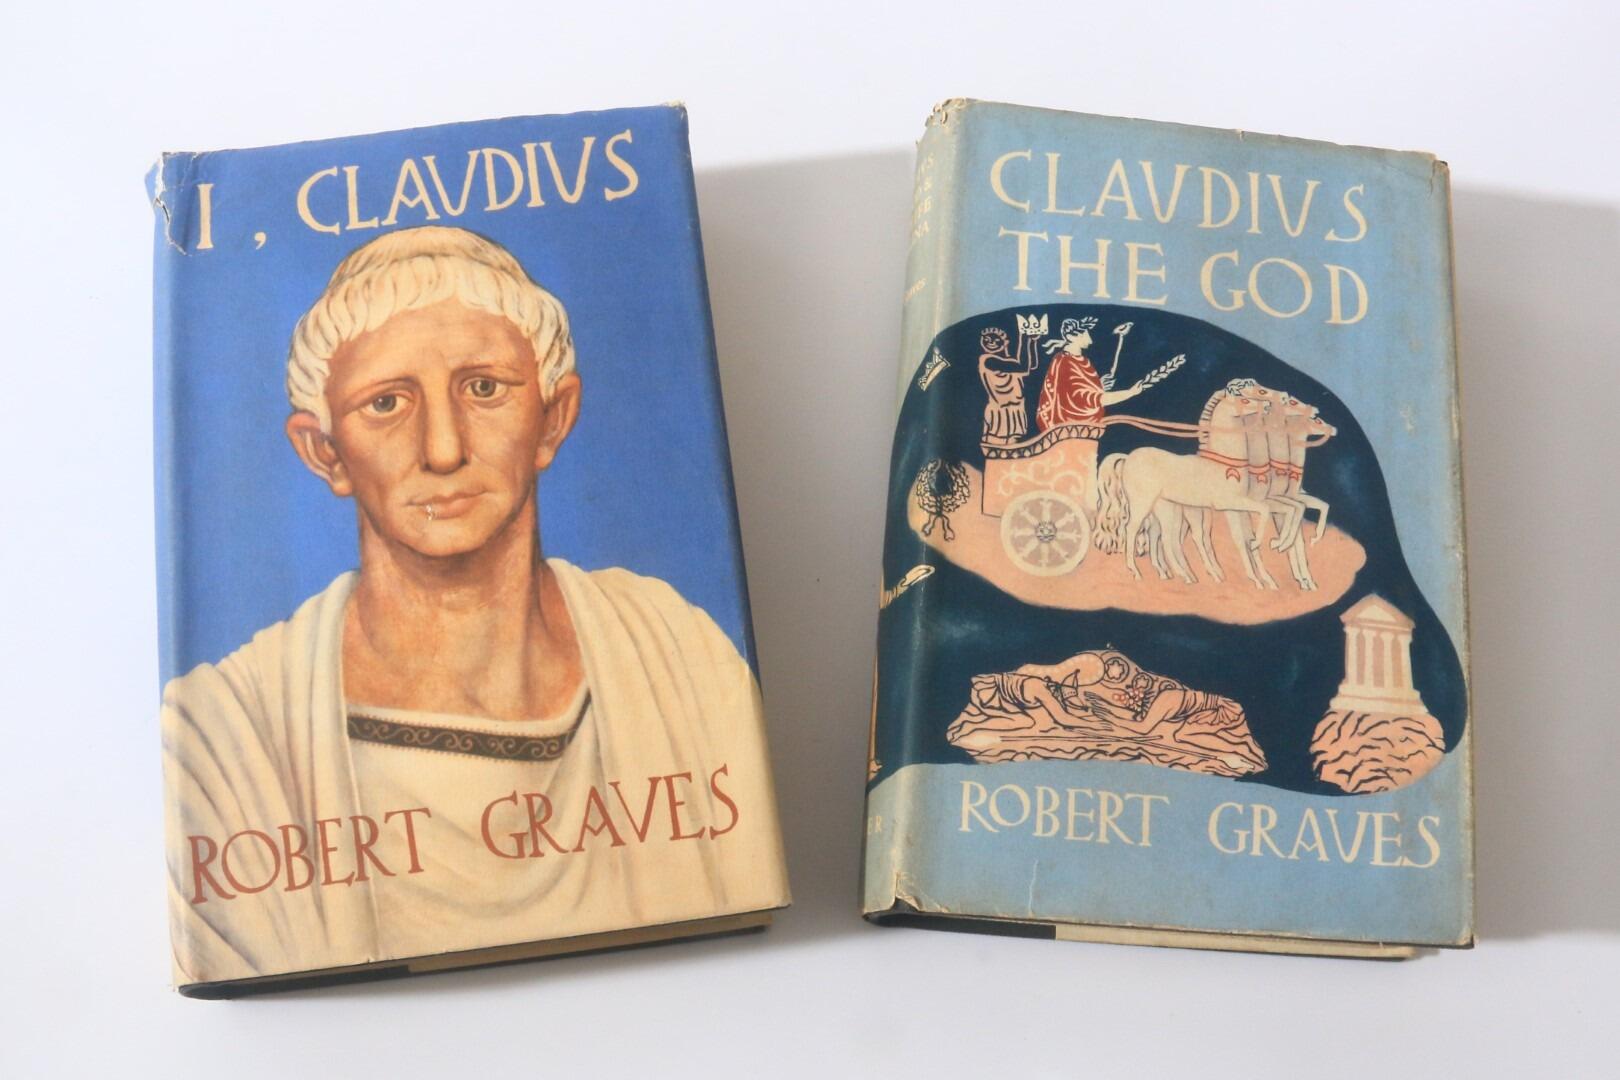 Robert Graves - I, Claudius w/ Claudius the God and his wife Messalina - Arthur Barker, 1934, First Edition.